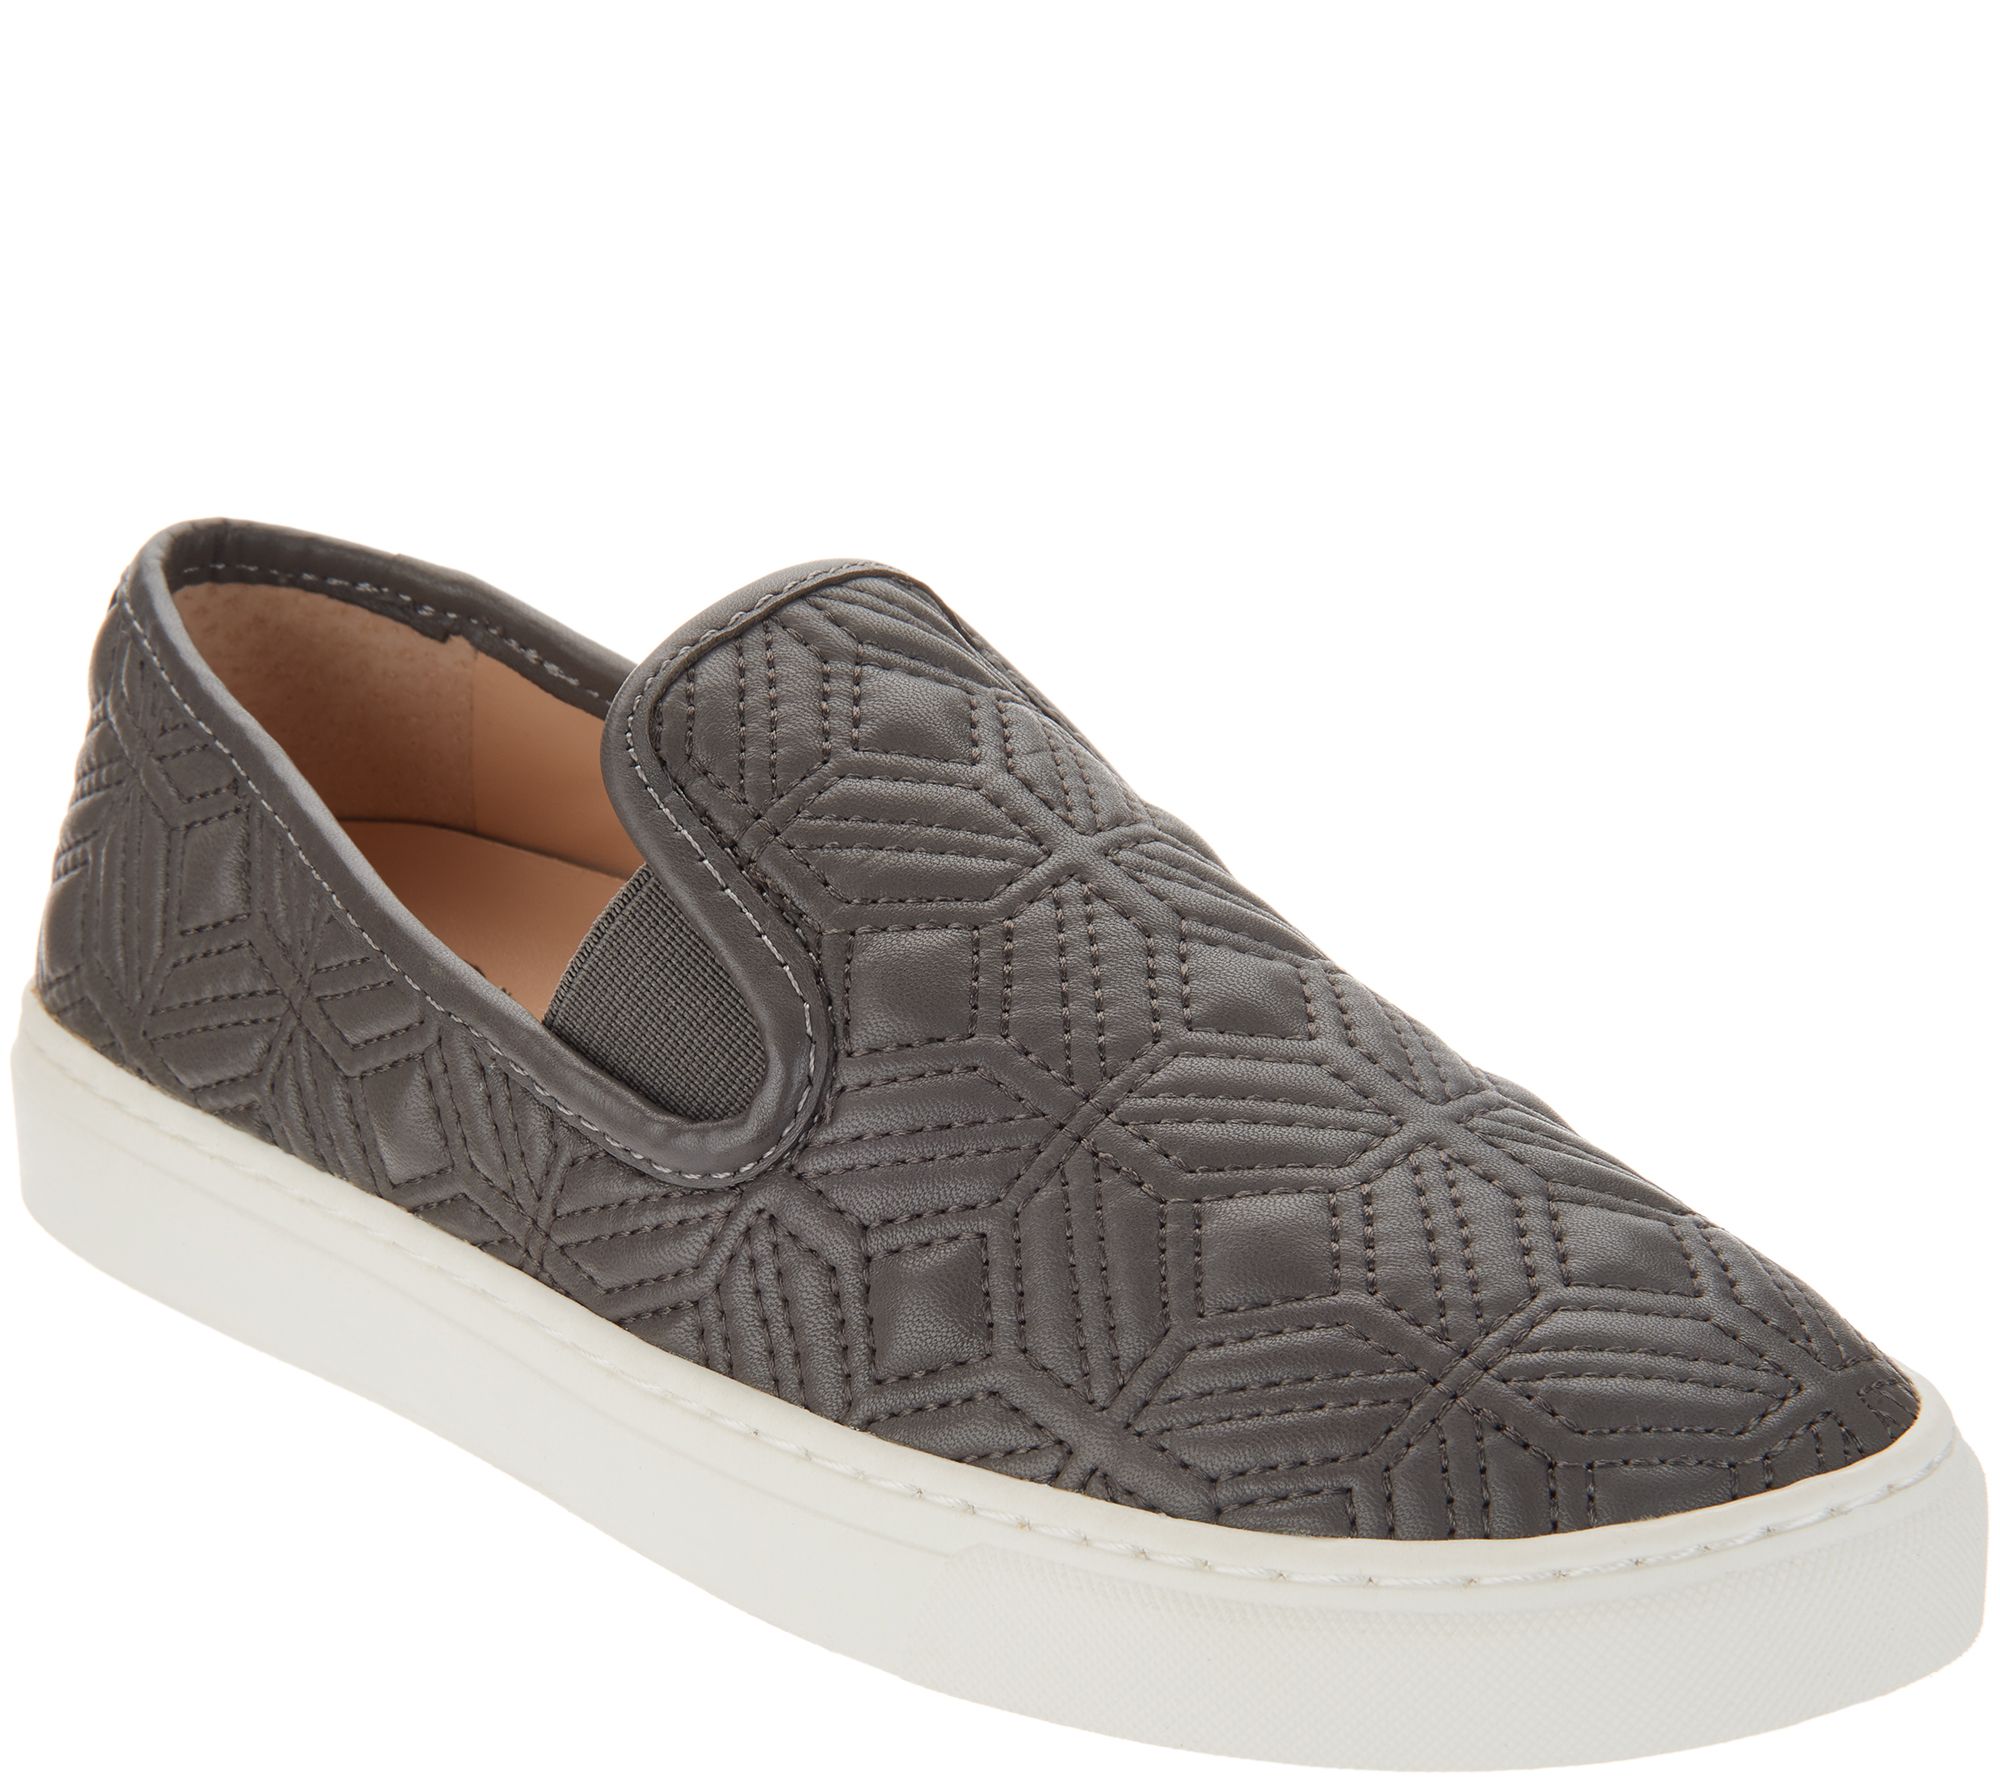 Vince Camuto Slip-On Shoes - Bianna 